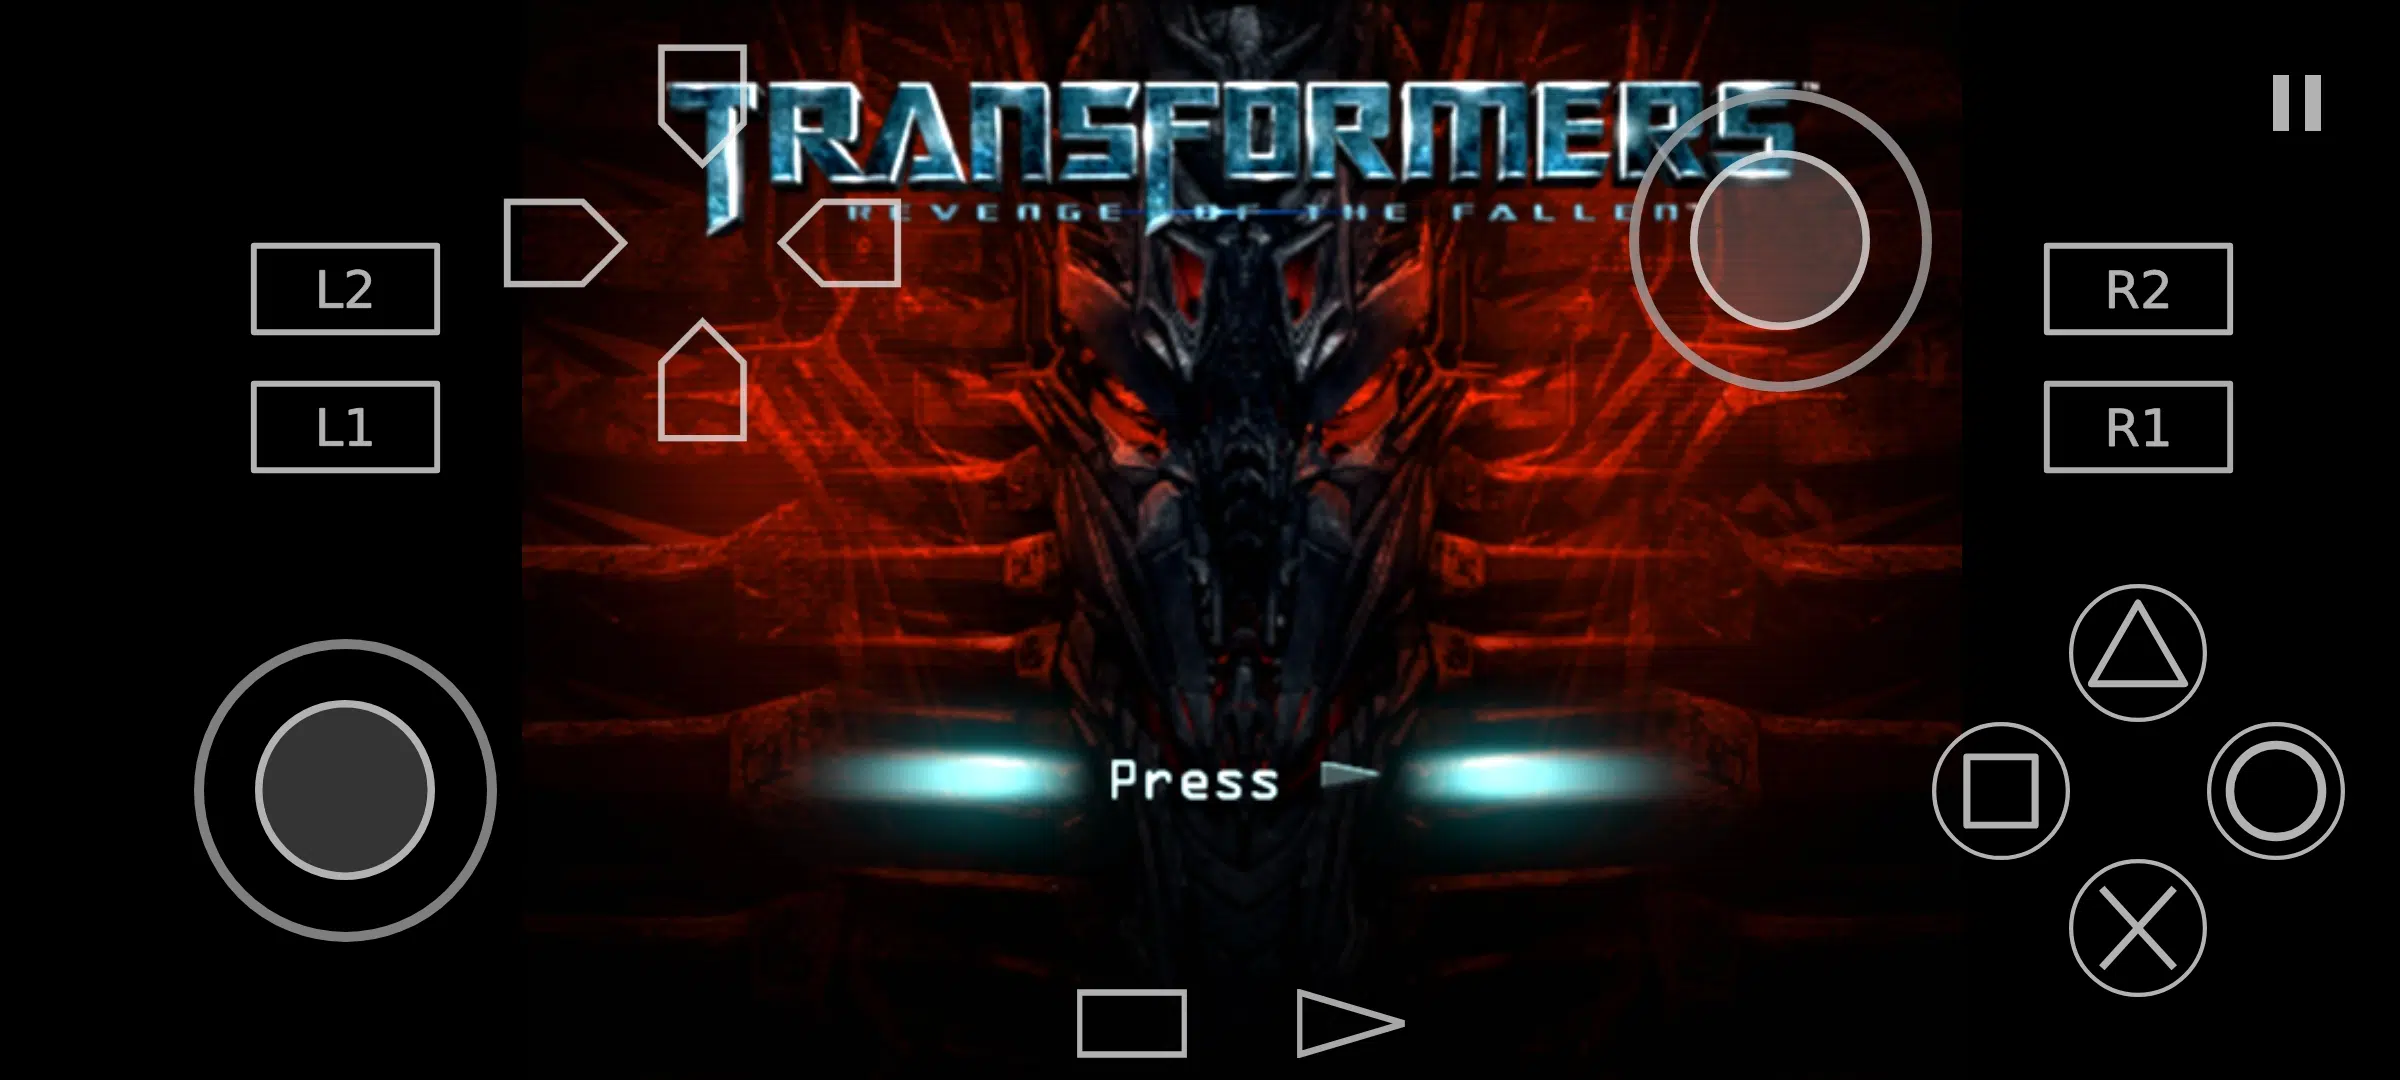 Transformers Revenge of the Fallen Game Download Android APK - AetherSX2 Ps2 Emulator